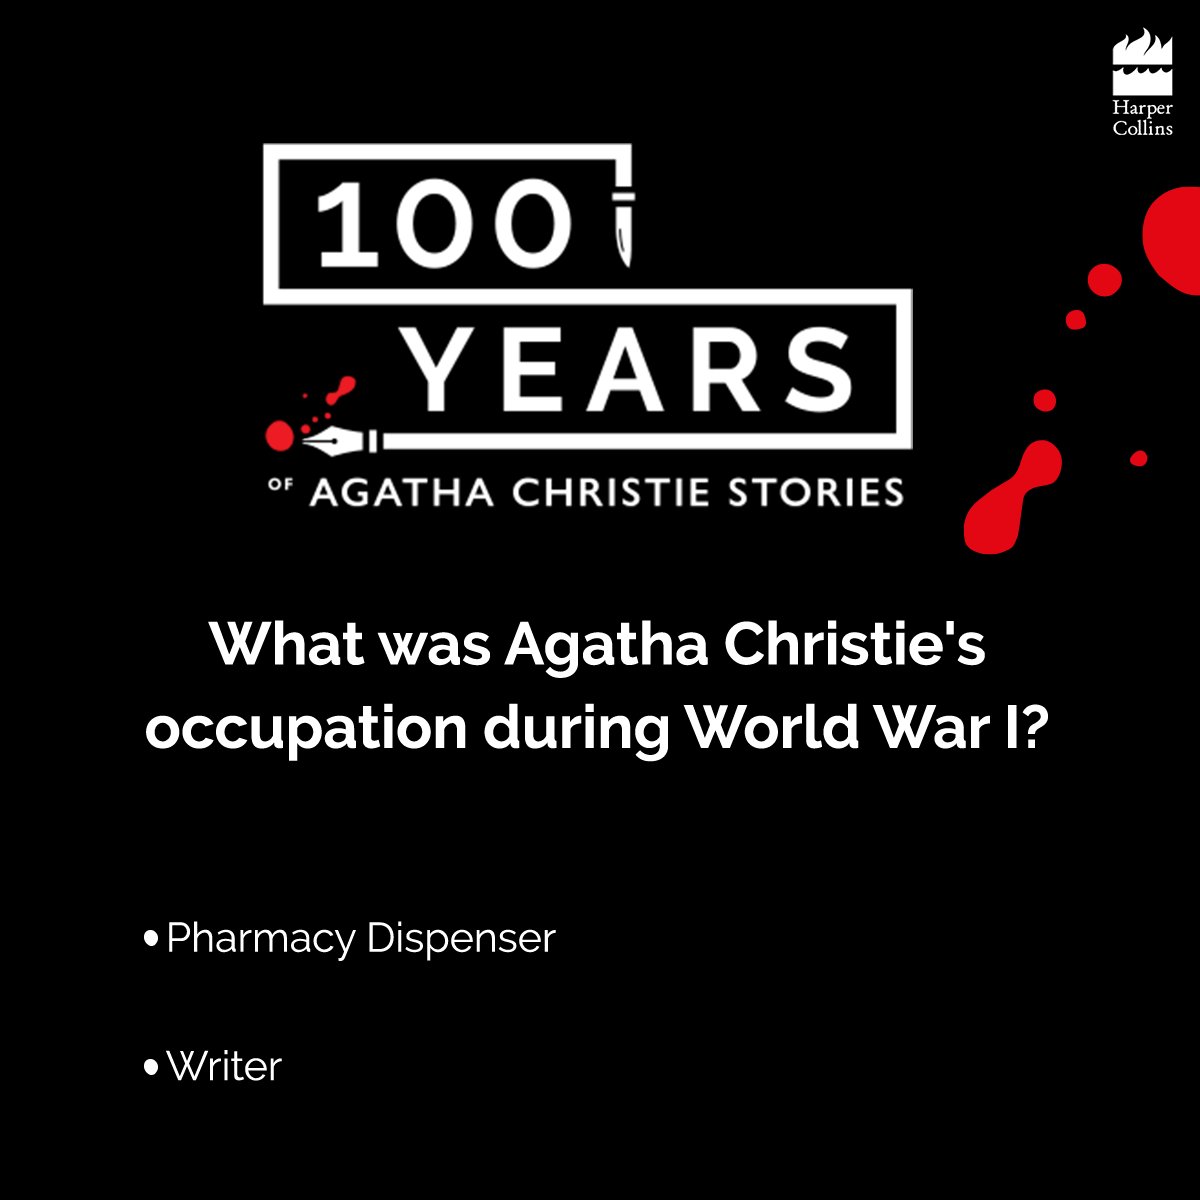 #ContestAlert
The final question for the #100YearsOfChristie #Quiz. Answer all the questions correctly to win an exciting prize!
@agathachristie